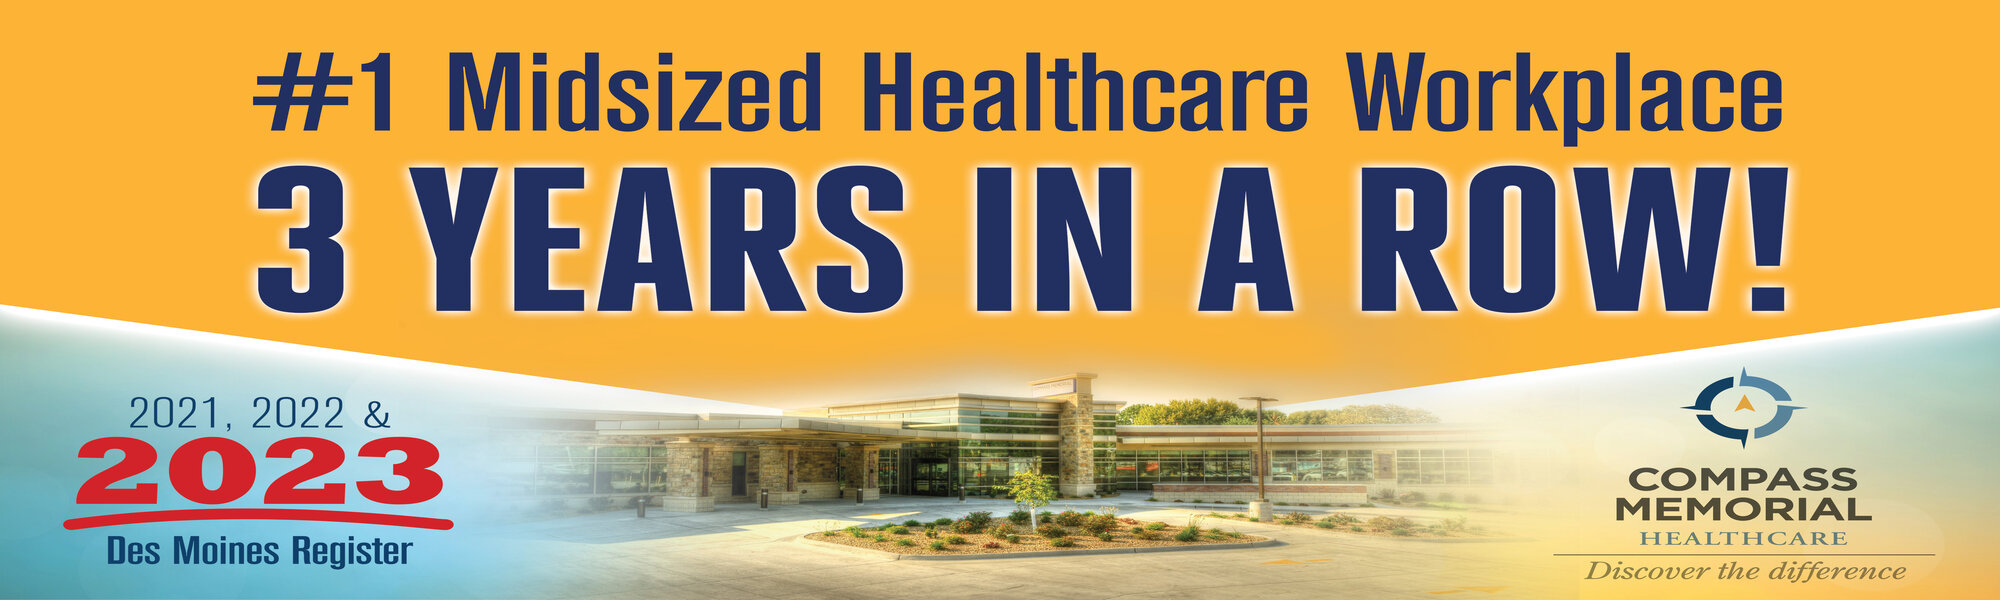 #1 Midsized Healthcare Workplace
3 Years in a Row!